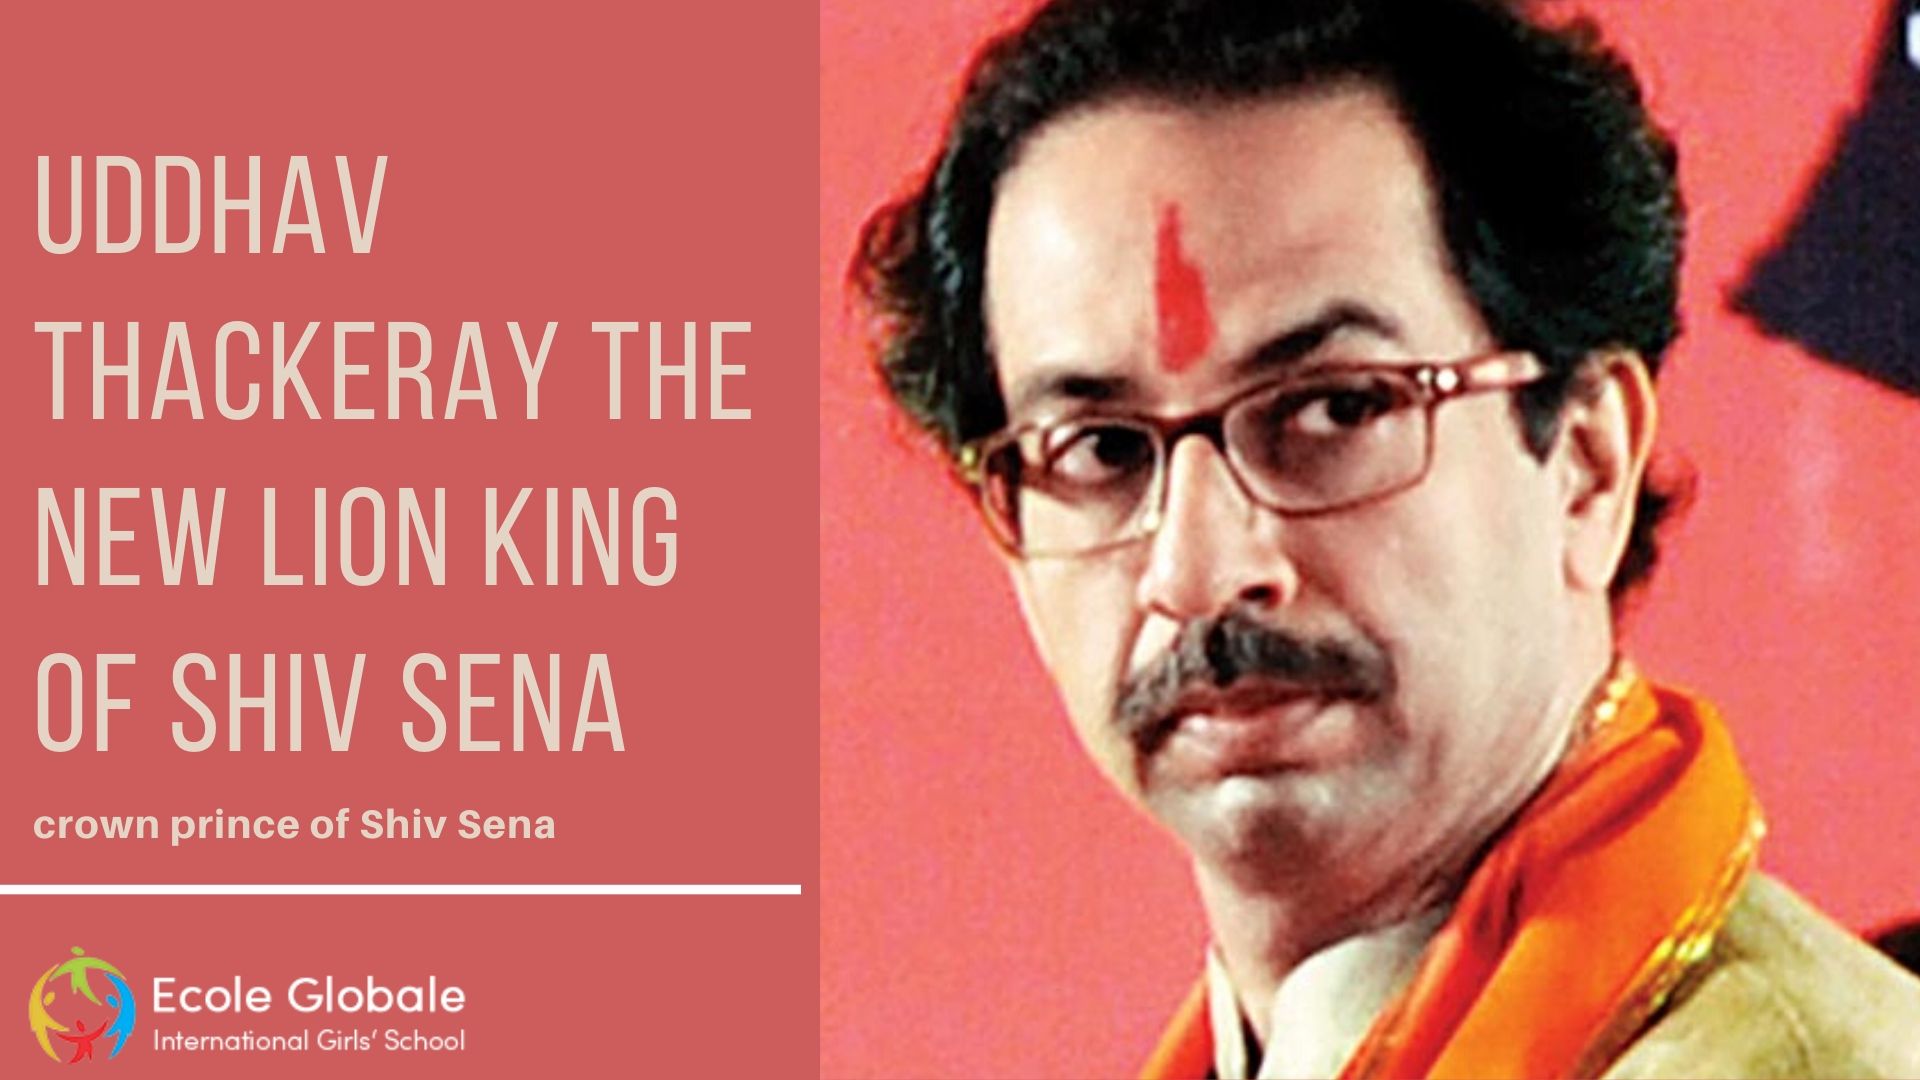 You are currently viewing Uddhav Thackeray the new lion king of shiv sena